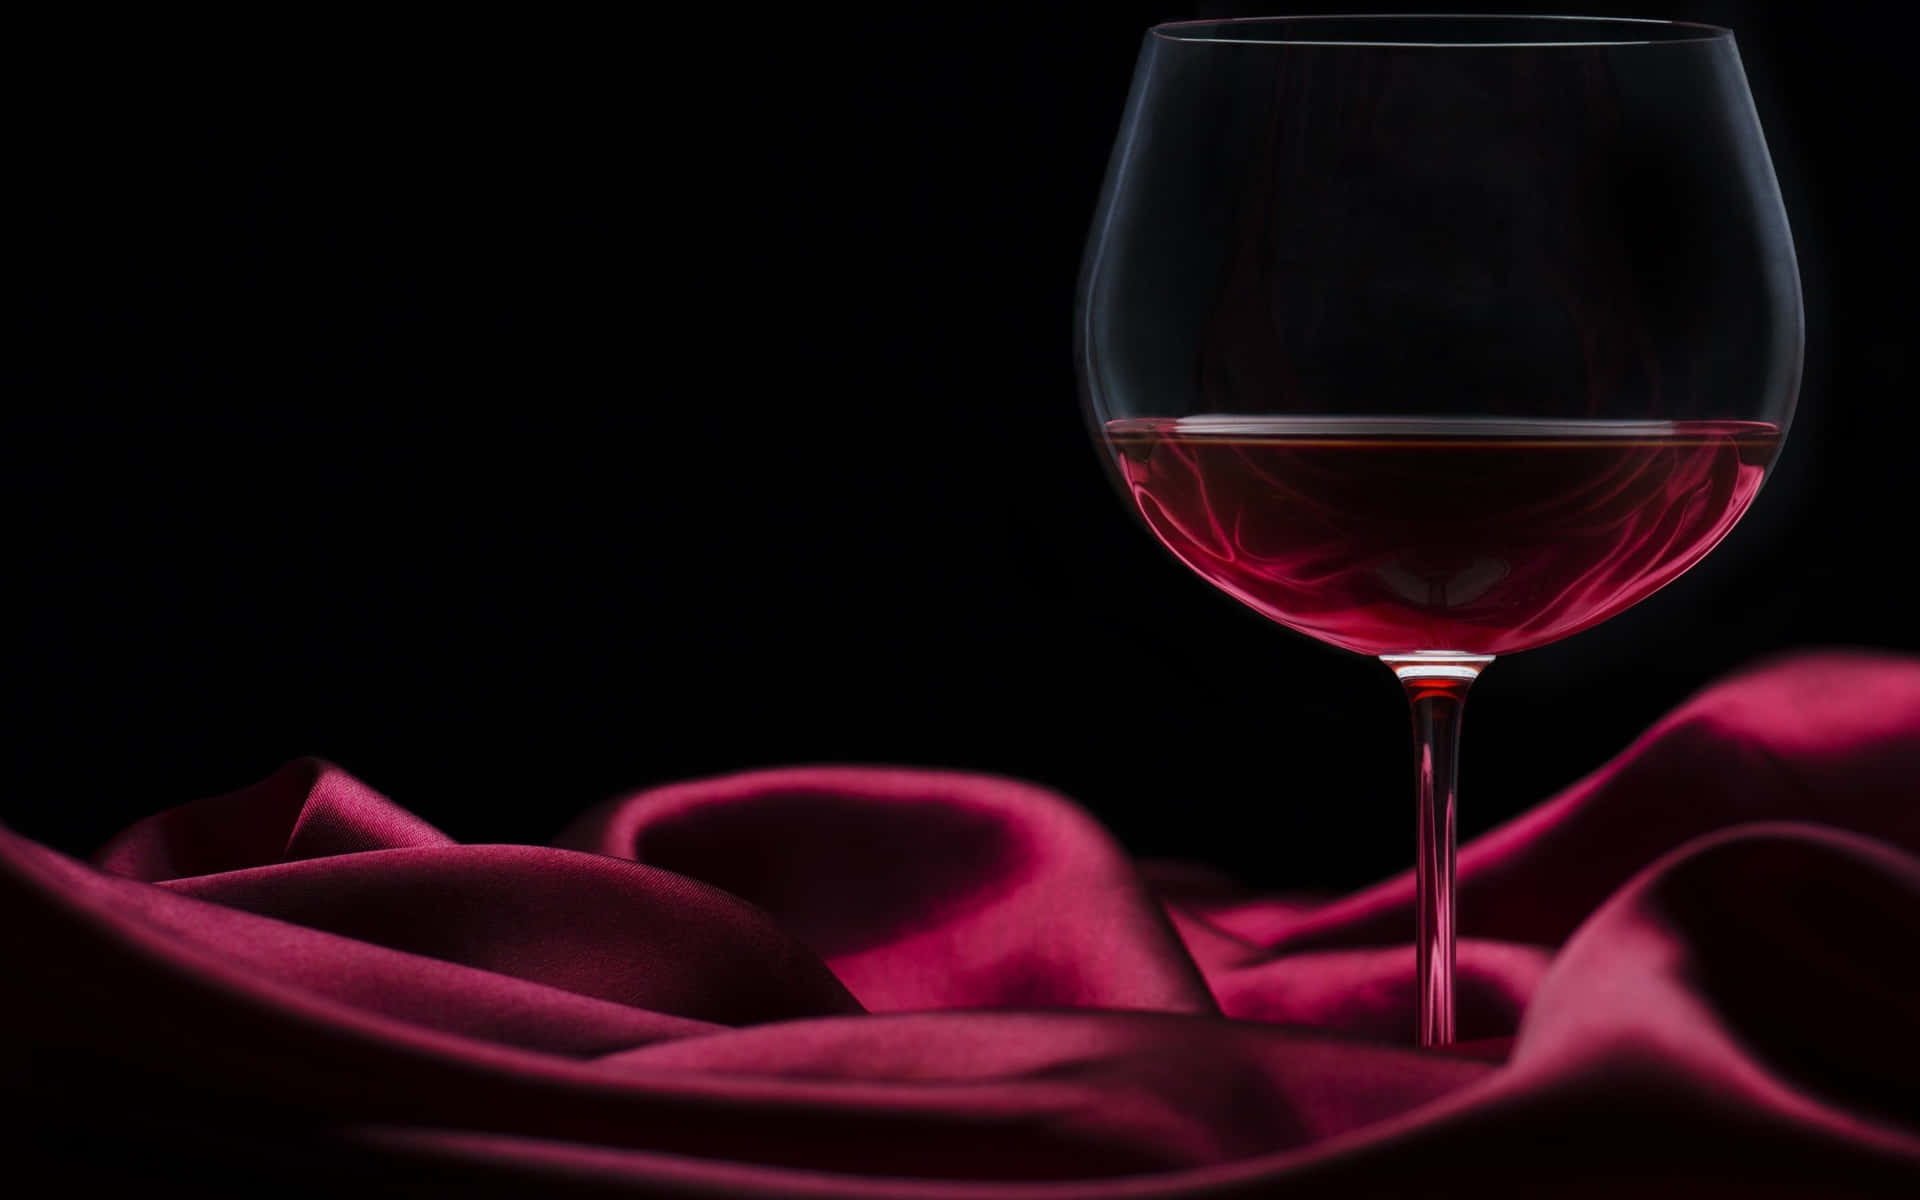 Captivating Red Wine Glass Wallpaper